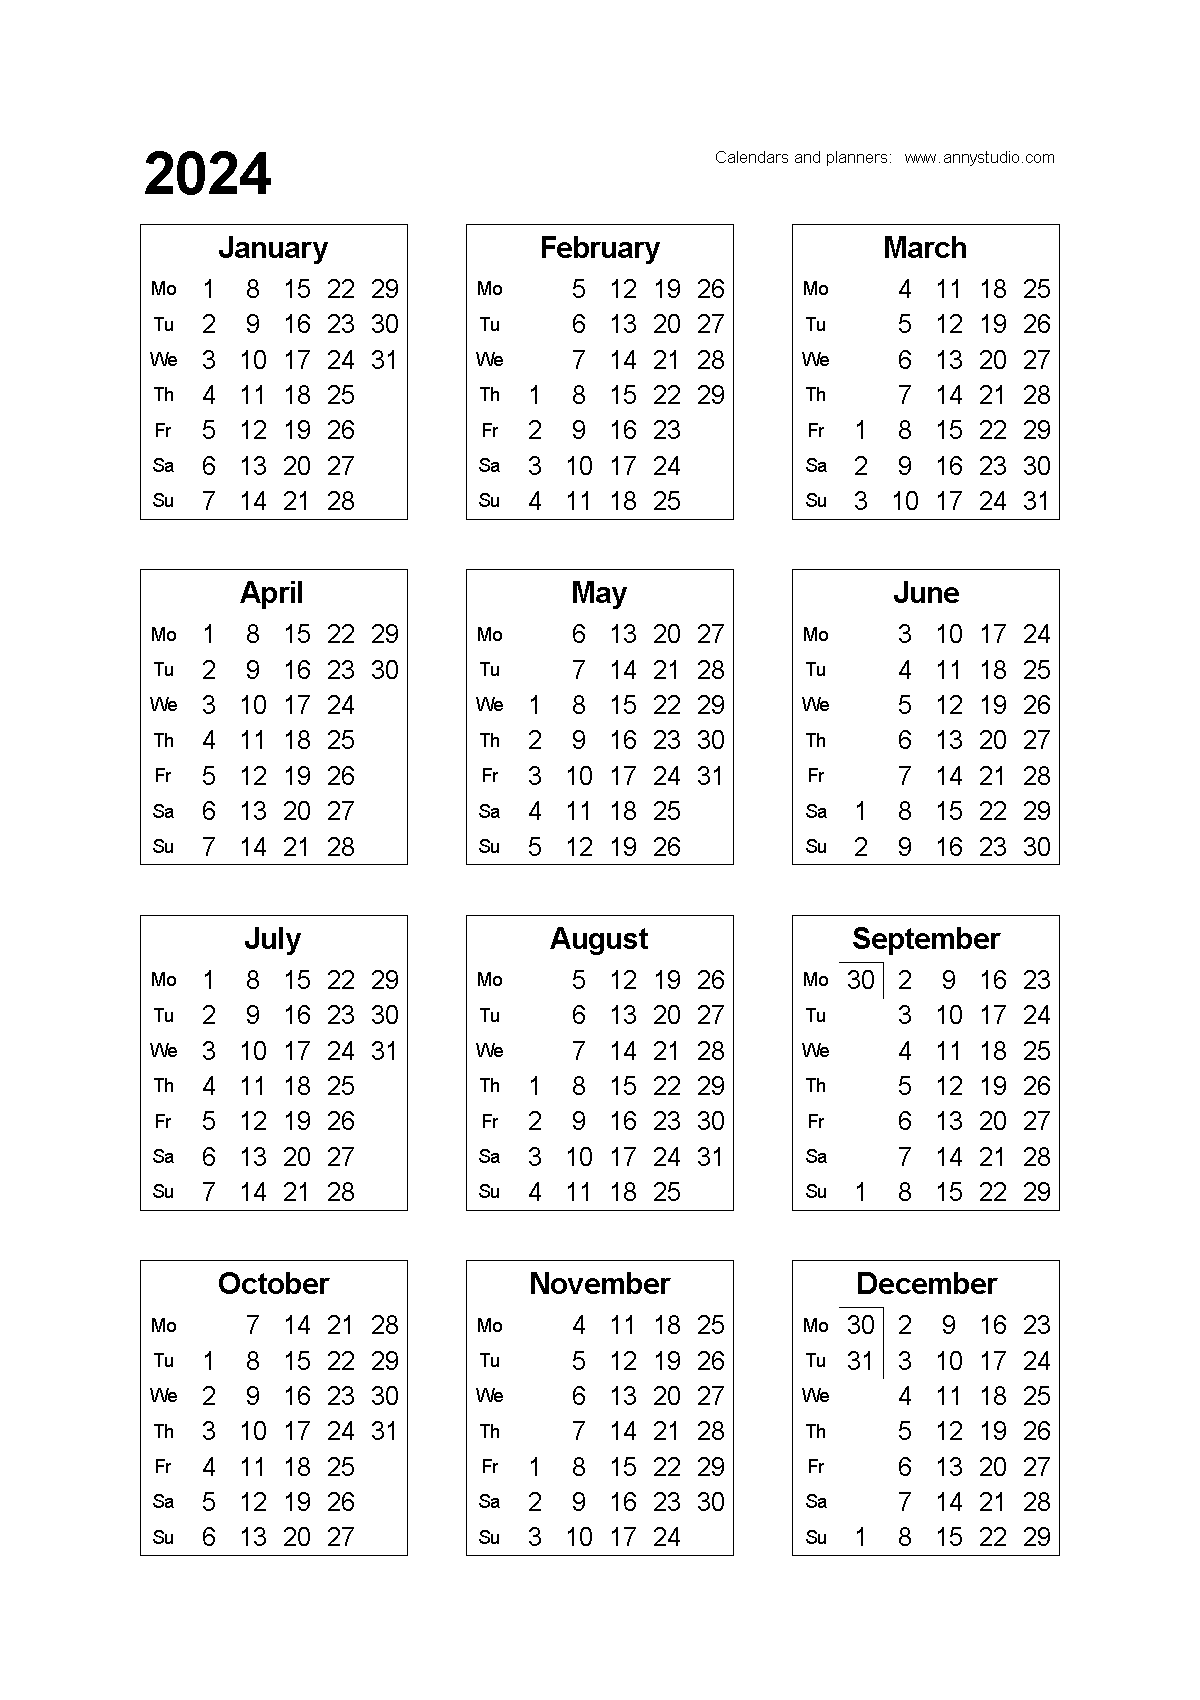 Free Printable Calendars And Planners 2024, 2025 And 2026 with Free Printable Calendar 2024 A5